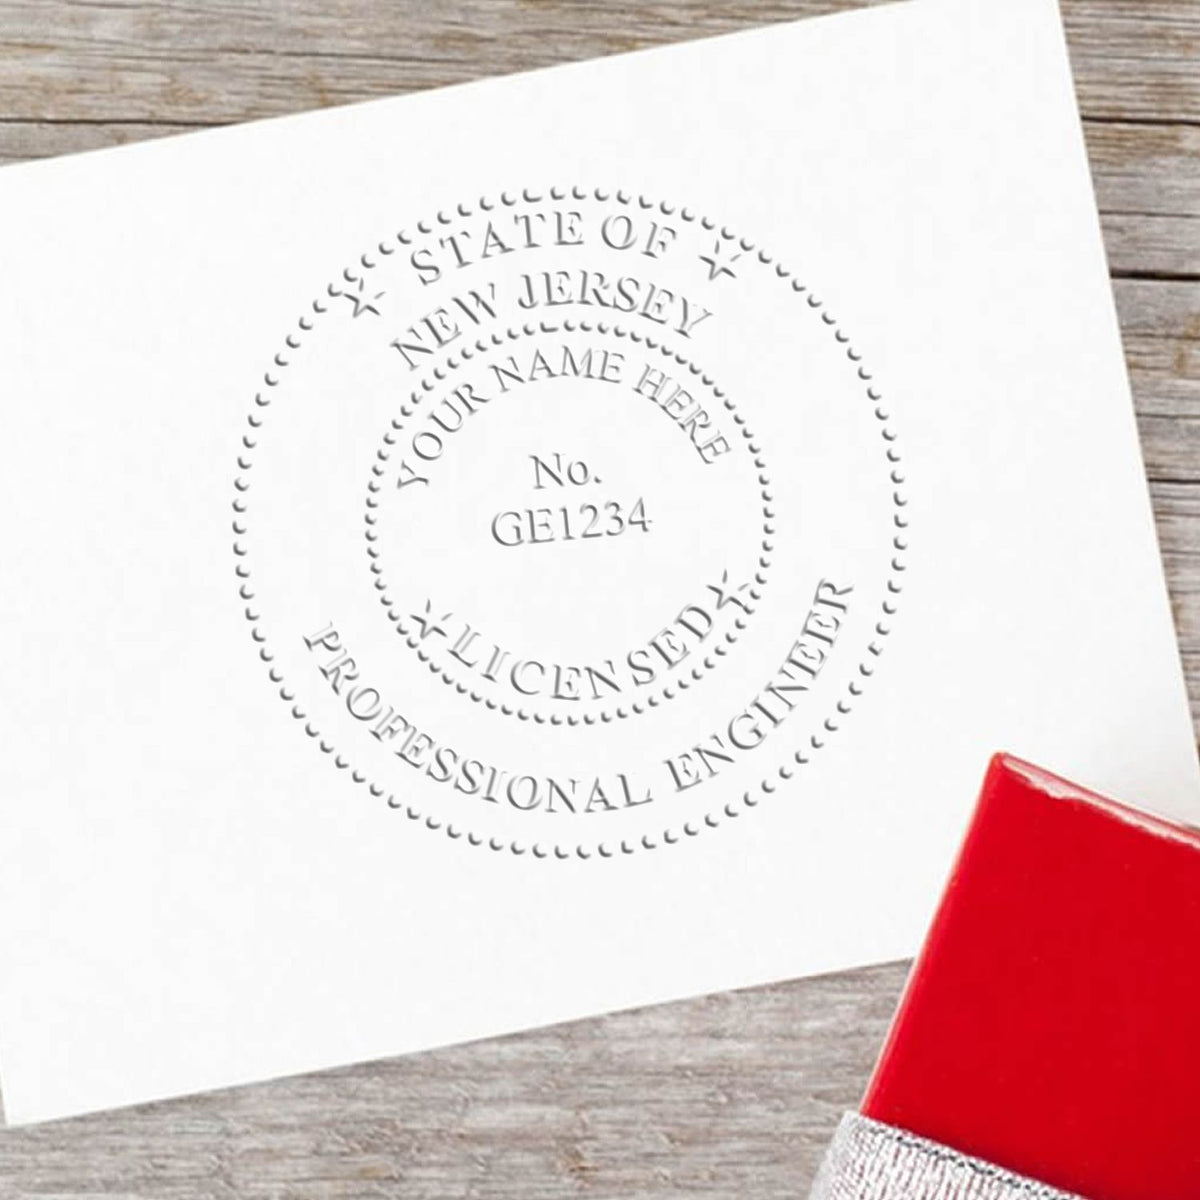 The Heavy Duty Cast Iron New Jersey Engineer Seal Embosser stamp impression comes to life with a crisp, detailed photo on paper - showcasing true professional quality.